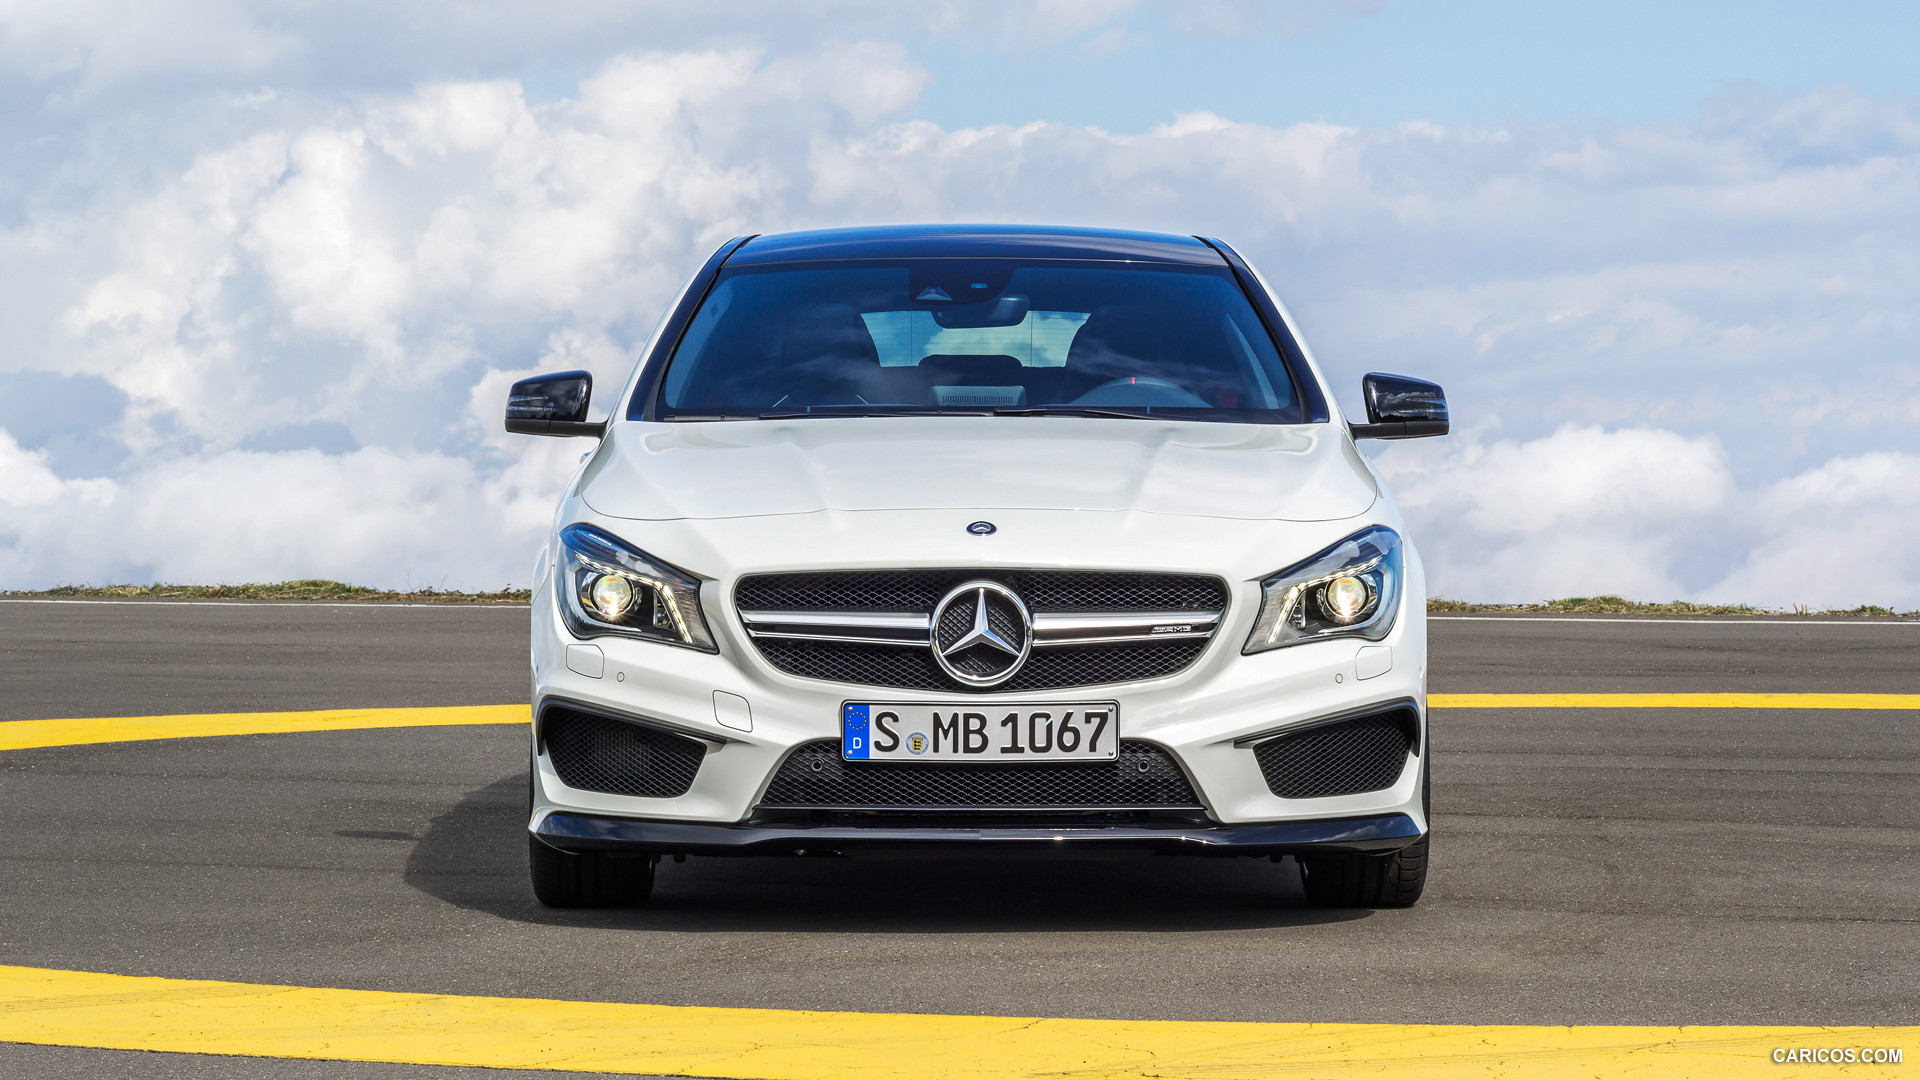 2015 Mercedes-Benz CLA 45 AMG Shooting Brake (Calcite White) - Front, #18 of 70